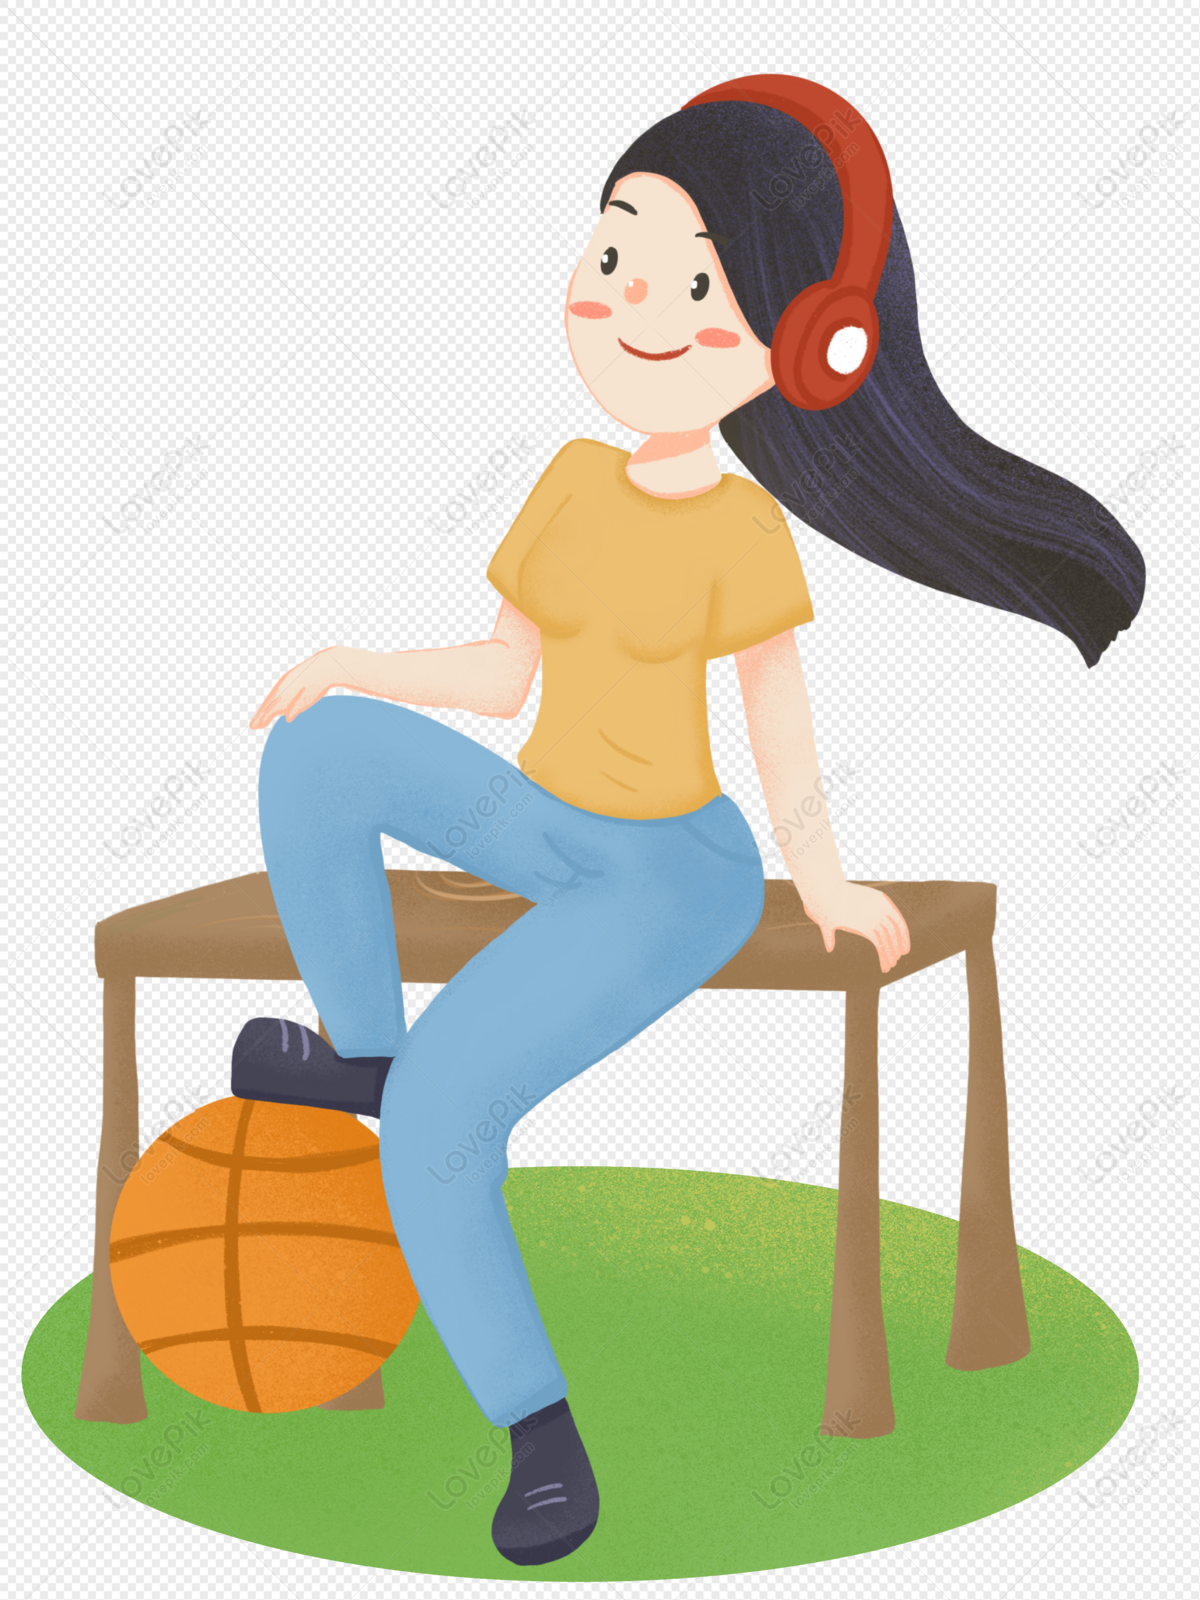 Cartoon Girl Listening To Song Illustration Free PNG And Clipart Image For  Free Download - Lovepik | 401267439